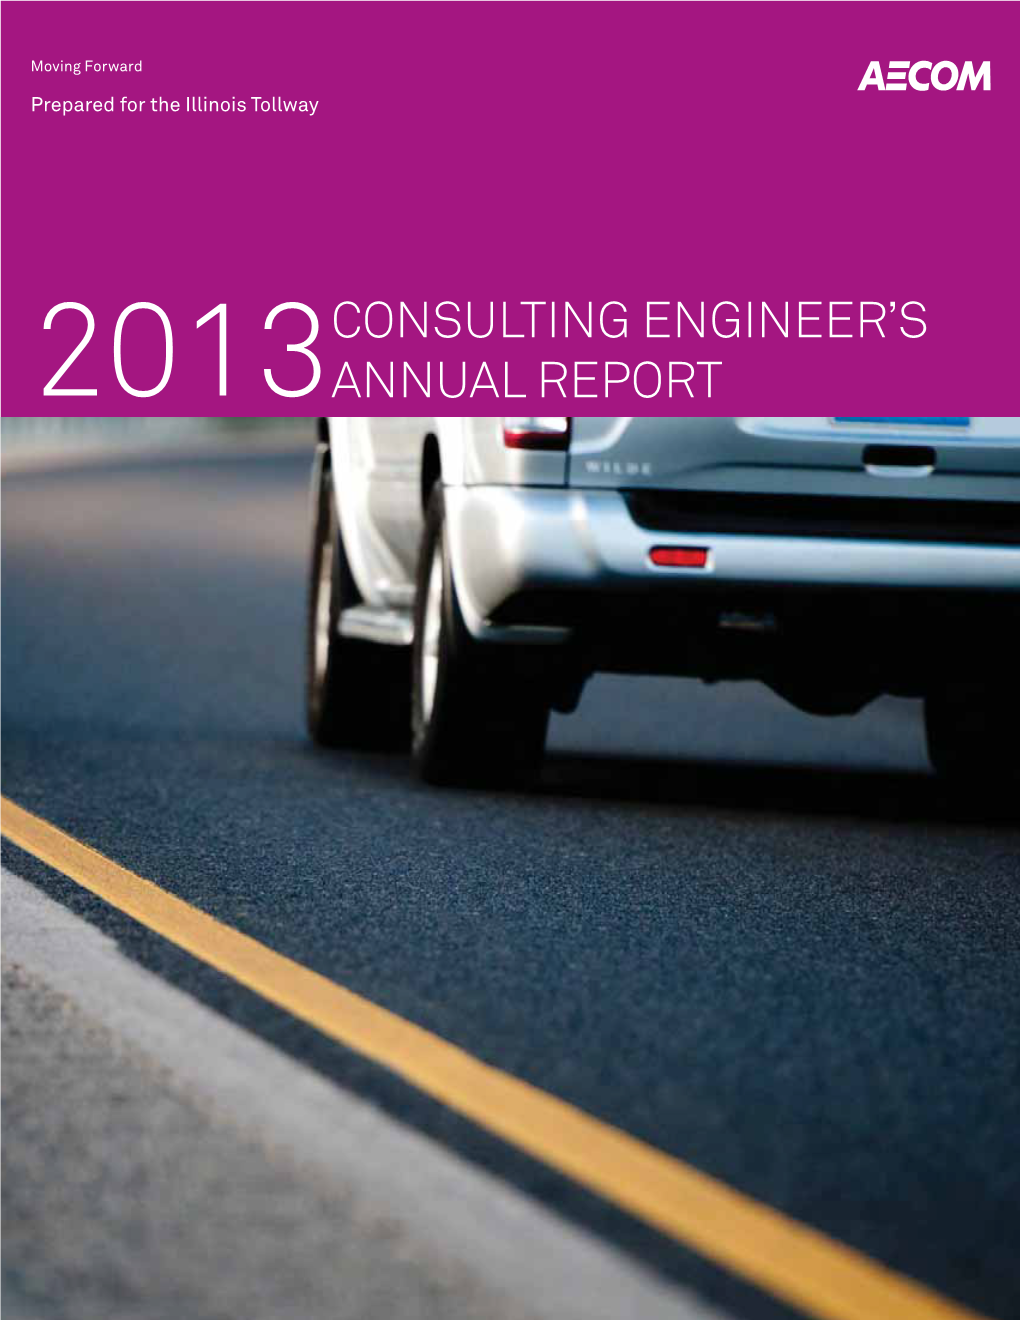 2013 Consulting Engineer's Annual Report